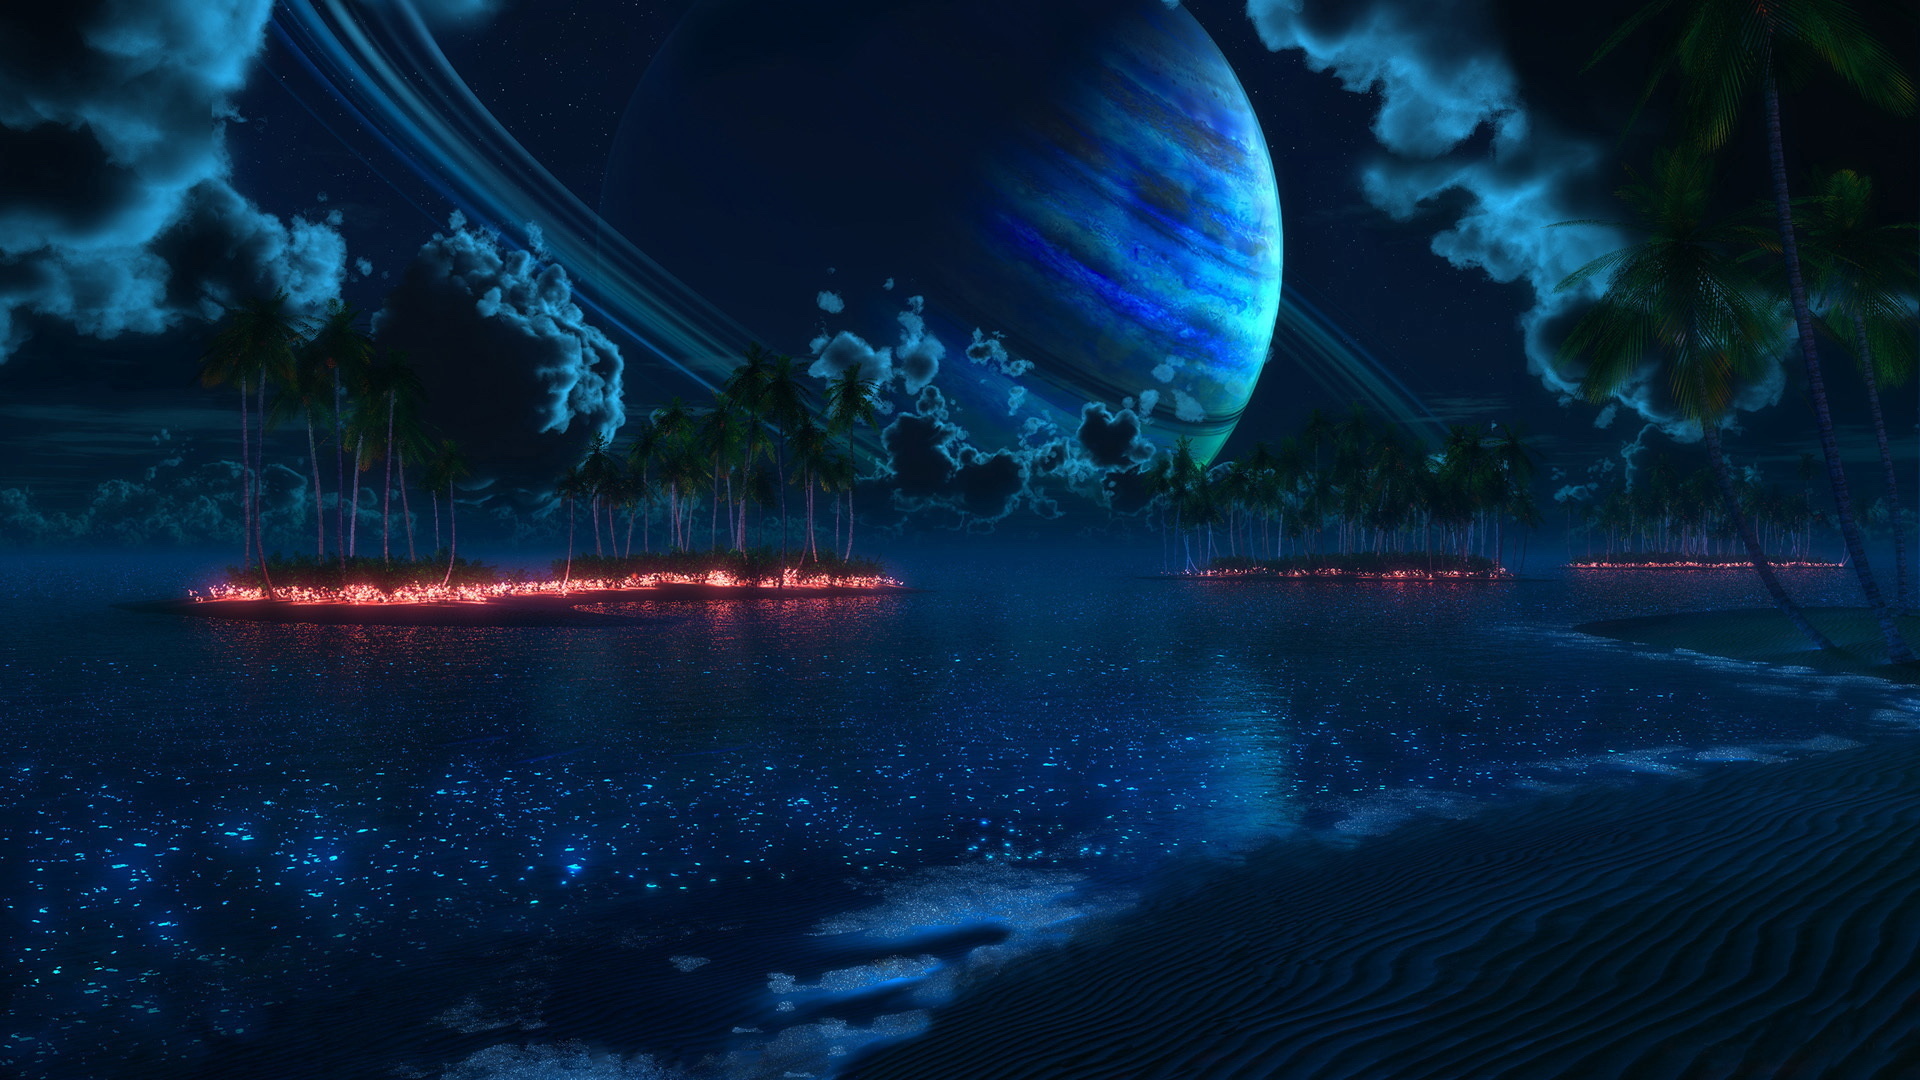 sci fi, Cg, Digital art, Manipulation, Fire, Flames, Lakes, Nature, Islands, Jungle, Trees, Forest, Blue, Skies, Moon, Planets, Clouds, Moonlight, Artistic, Surreal Wallpaper